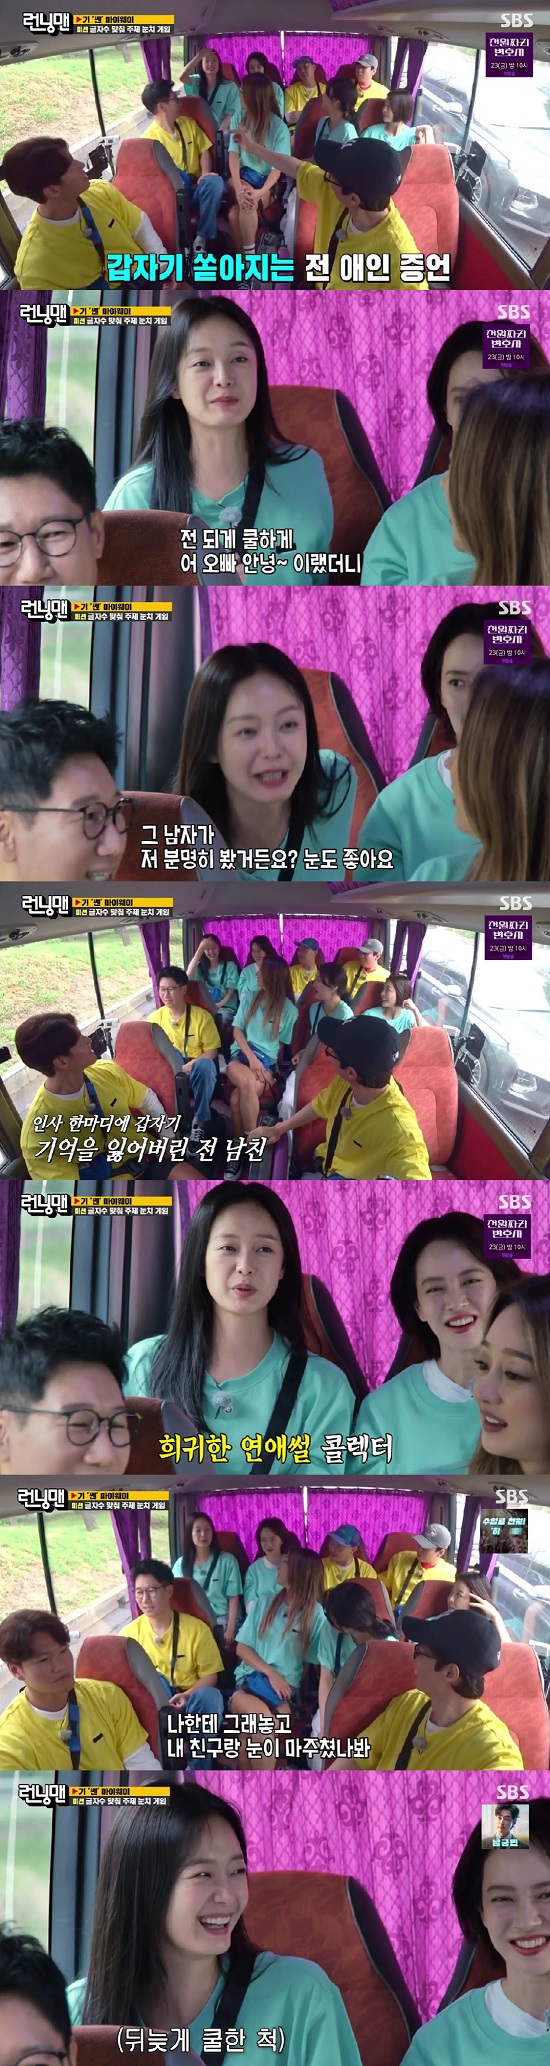 In the SBS entertainment program Running Man broadcasted on the 11th, Jin Seo-yeon, Ok Ja-yeon and Choi Yeo-jin appeared and Gi My Way Race got on the air.On the day of the broadcast, Ji Suk-jin misrepresented the name to Ok Ja-yeon, saying, Mr. Okja.The members continued to criticize, and Ji Suk-jin apologized, saying, Im sorry. Ok Ja-yeon said, My friends called Okja and said, How did you know?I wanted to, he laughed.Ji Suk-jin said: Mr. Jin Seo-yeon has been a huge fan since I was Beliver, and I wanted to say, Ive been hiding such a talent.Yoo Jae-Suk then joked, How many times do you talk about Believer? And Jin Seo-yeon is older than his brother. Since then, there has been a game of attention that shouts answers that fit the topic.The production team said, What do you think when you meet your ex-girlfriend? and the problem was that Jeon So-min and Choi Yeo-jin shouted their names at the same time.Yoo Jae-Suk asked Choi Yeo-jin, Have you ever actually encountered him? and Choi Yeo-jin replied no.Then, Jeon So-min said, I have a former.I was so cool, Hello, brother? And he said, I saw it clearly. I have good eyes. But I saw it for a while and it was called Who is it?Yoo Jae-Suk was saddened by How sick I am of you, and Ji Suk-jin responded, Why is this happening to him?Jeon So-min said: I wanted to go and squeeze a piece, I was with the Friends.But the more nasty thing is that I met my friend and looked at my friend and pretended to be cool to my friend. Jin Seo-yeon also said that he had met his ex-girlfriend while passing by. Jin Seo-yeon said, I have met him, but if you meet him for a long time, you do not know if you are reflexively negligent.I was going to open the glass door and I went back immediately because I saw the Tae. Haha said, I was forced to meet. I should have just said, Hello. Hello. I want to turn back the time.Photo: SBS broadcast screen